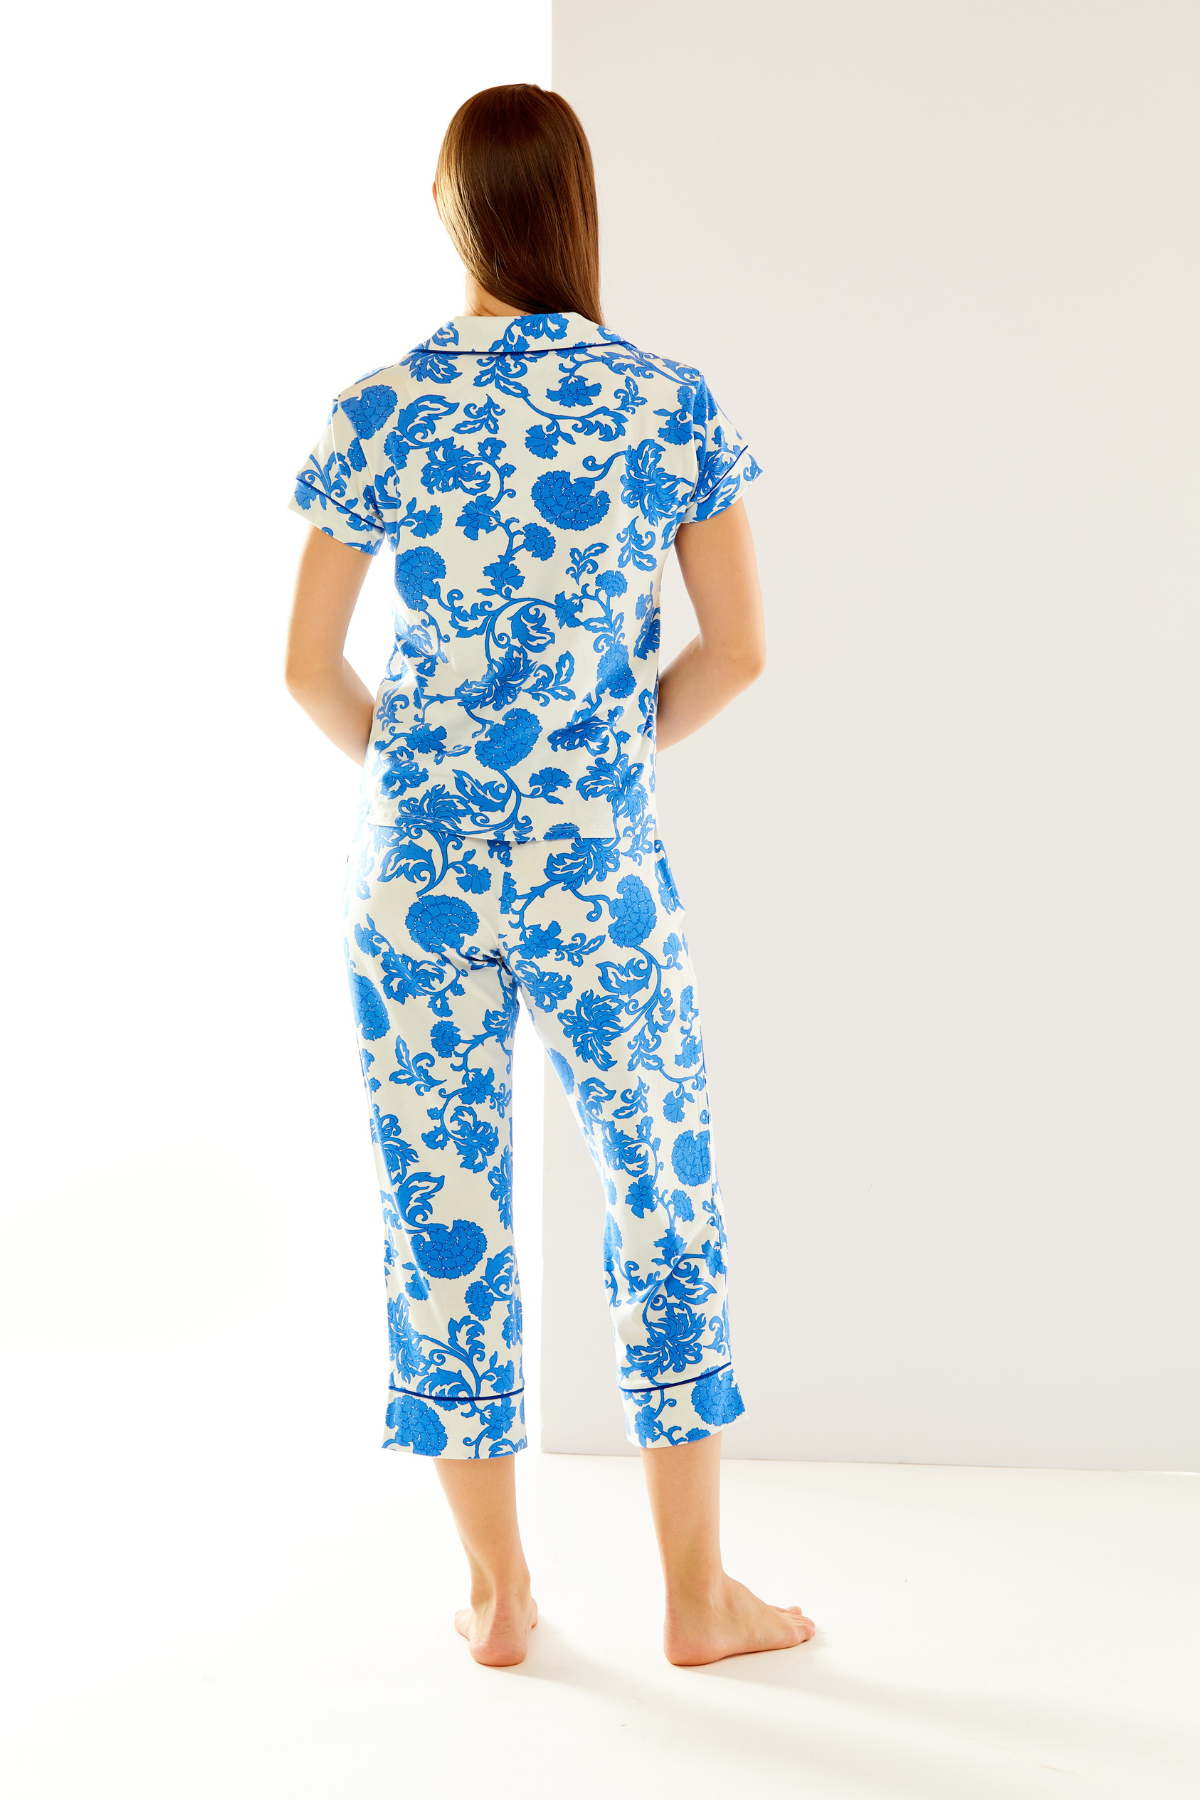 Woman in blue and white pajamas